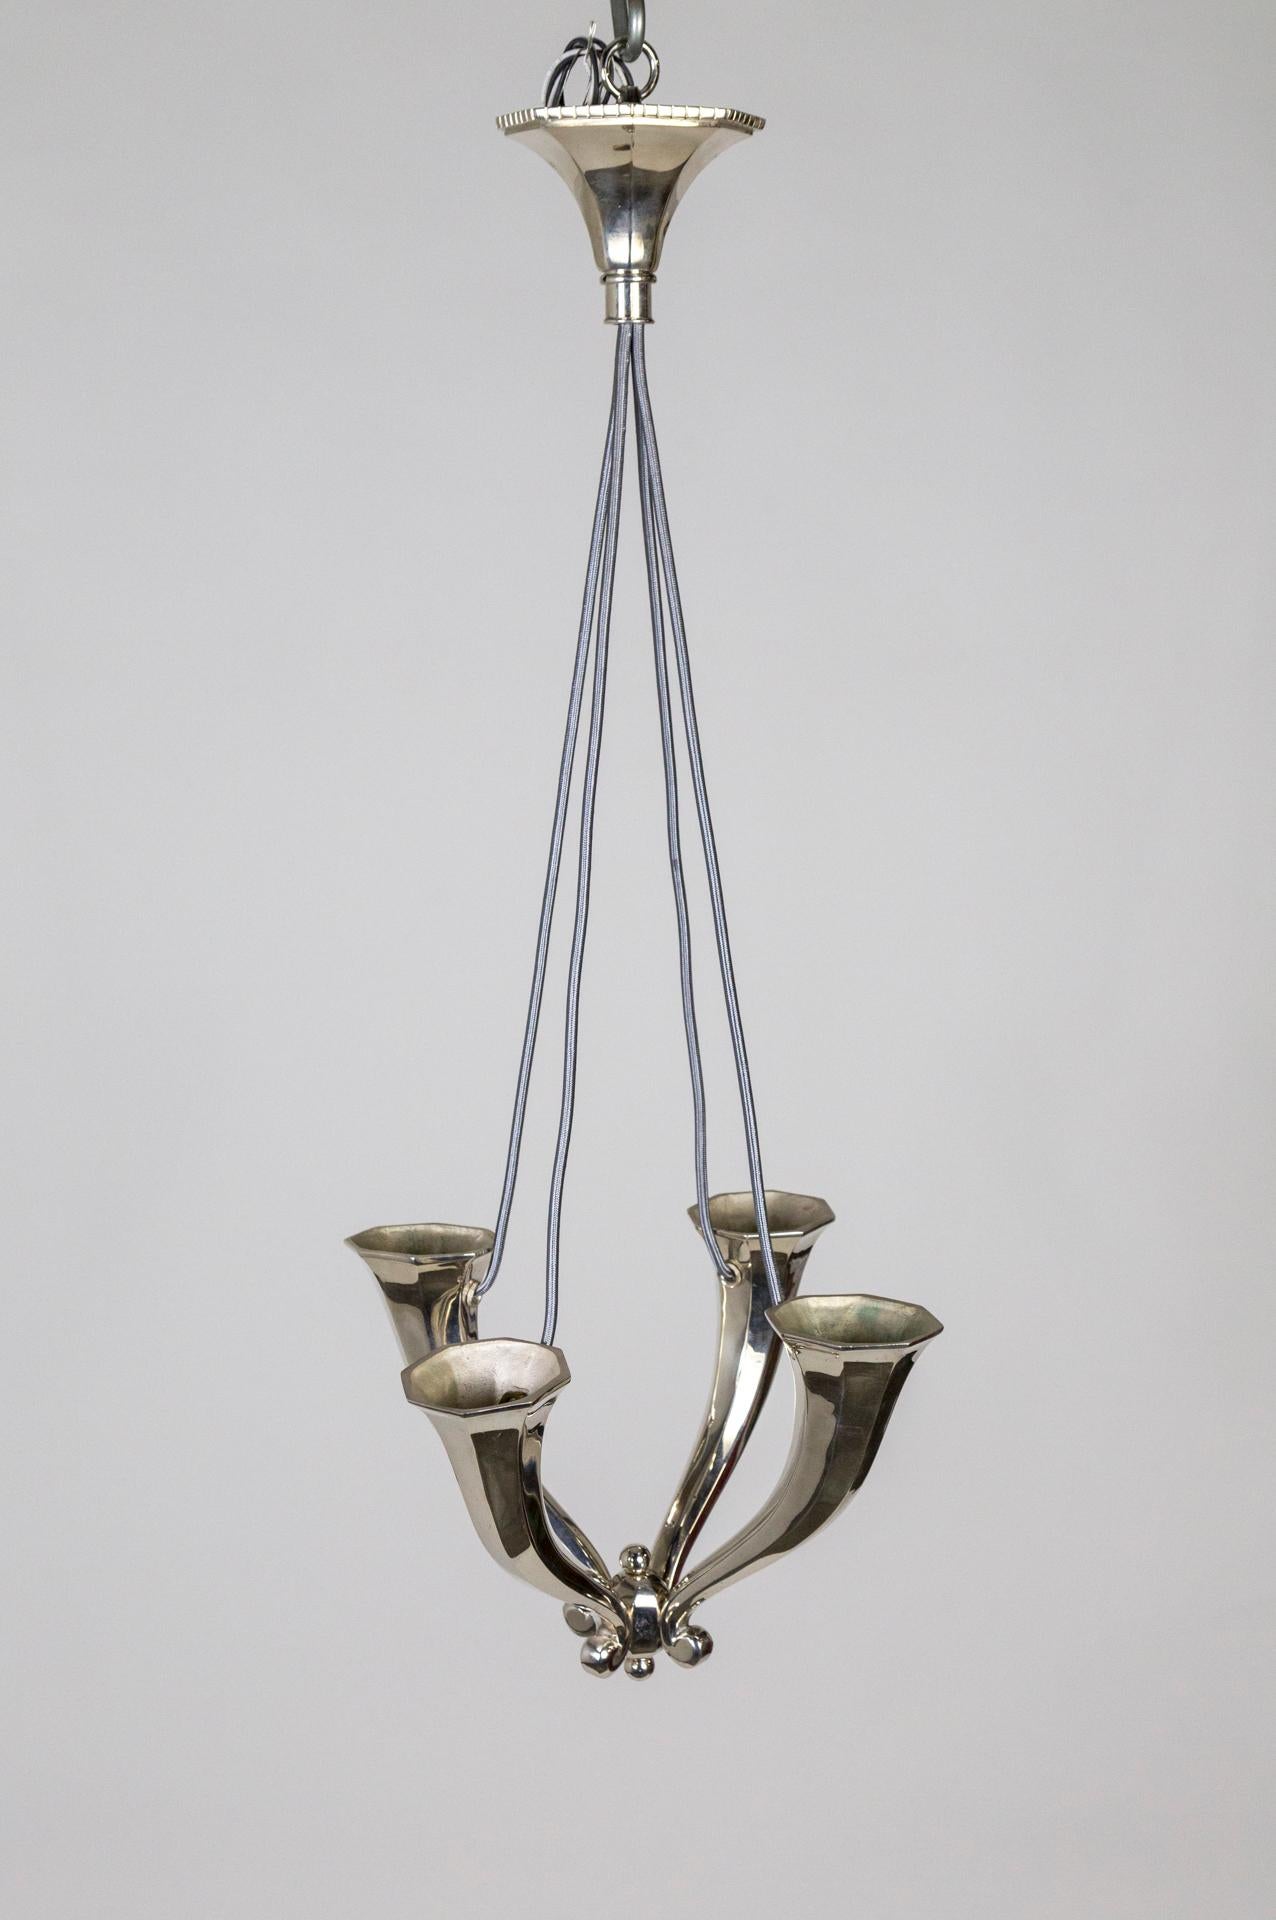 A solid, understated, shining silver chandelier with four upward facing, horn shaped arms. Recessed sockets have a clean look and light up the ceiling dramatically. Made in the early 20th century, newly silver plated and rewired with sleek,